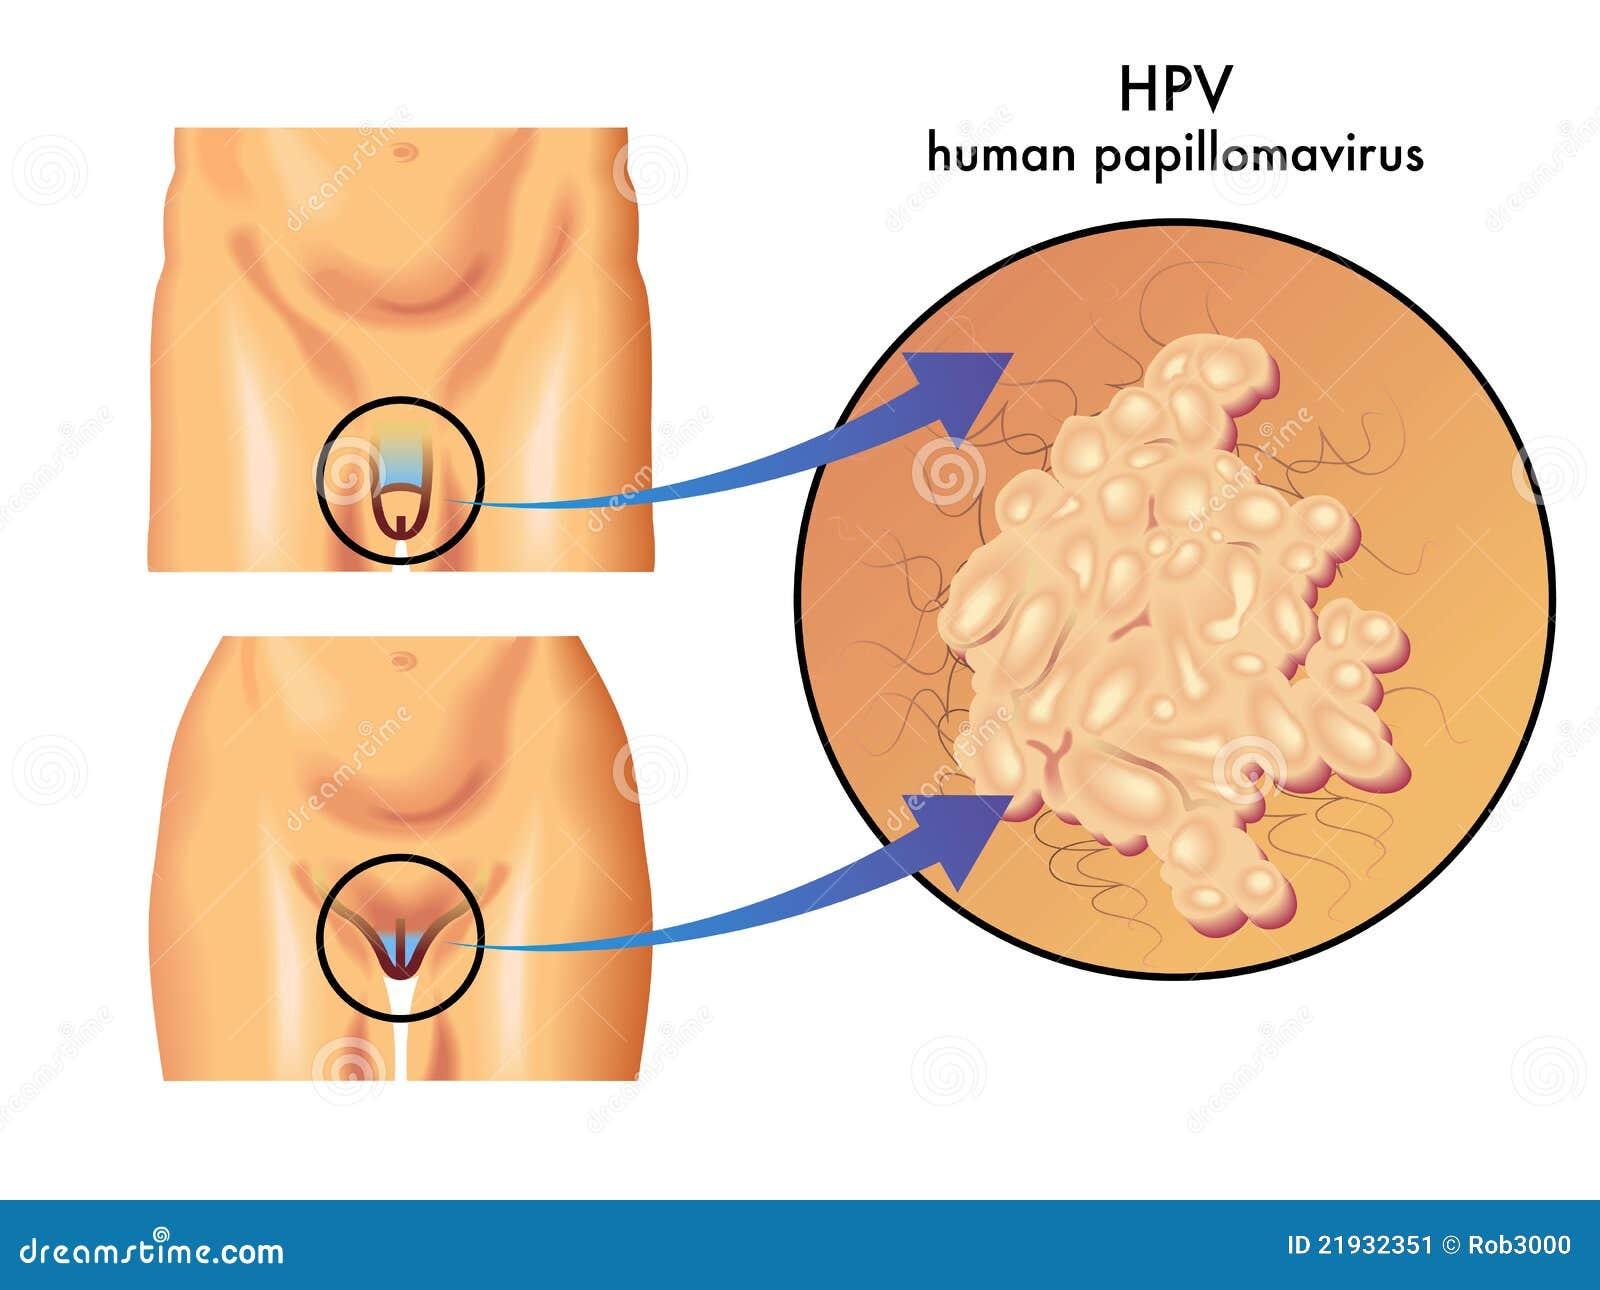 papilloma and hpv parazitii omul din